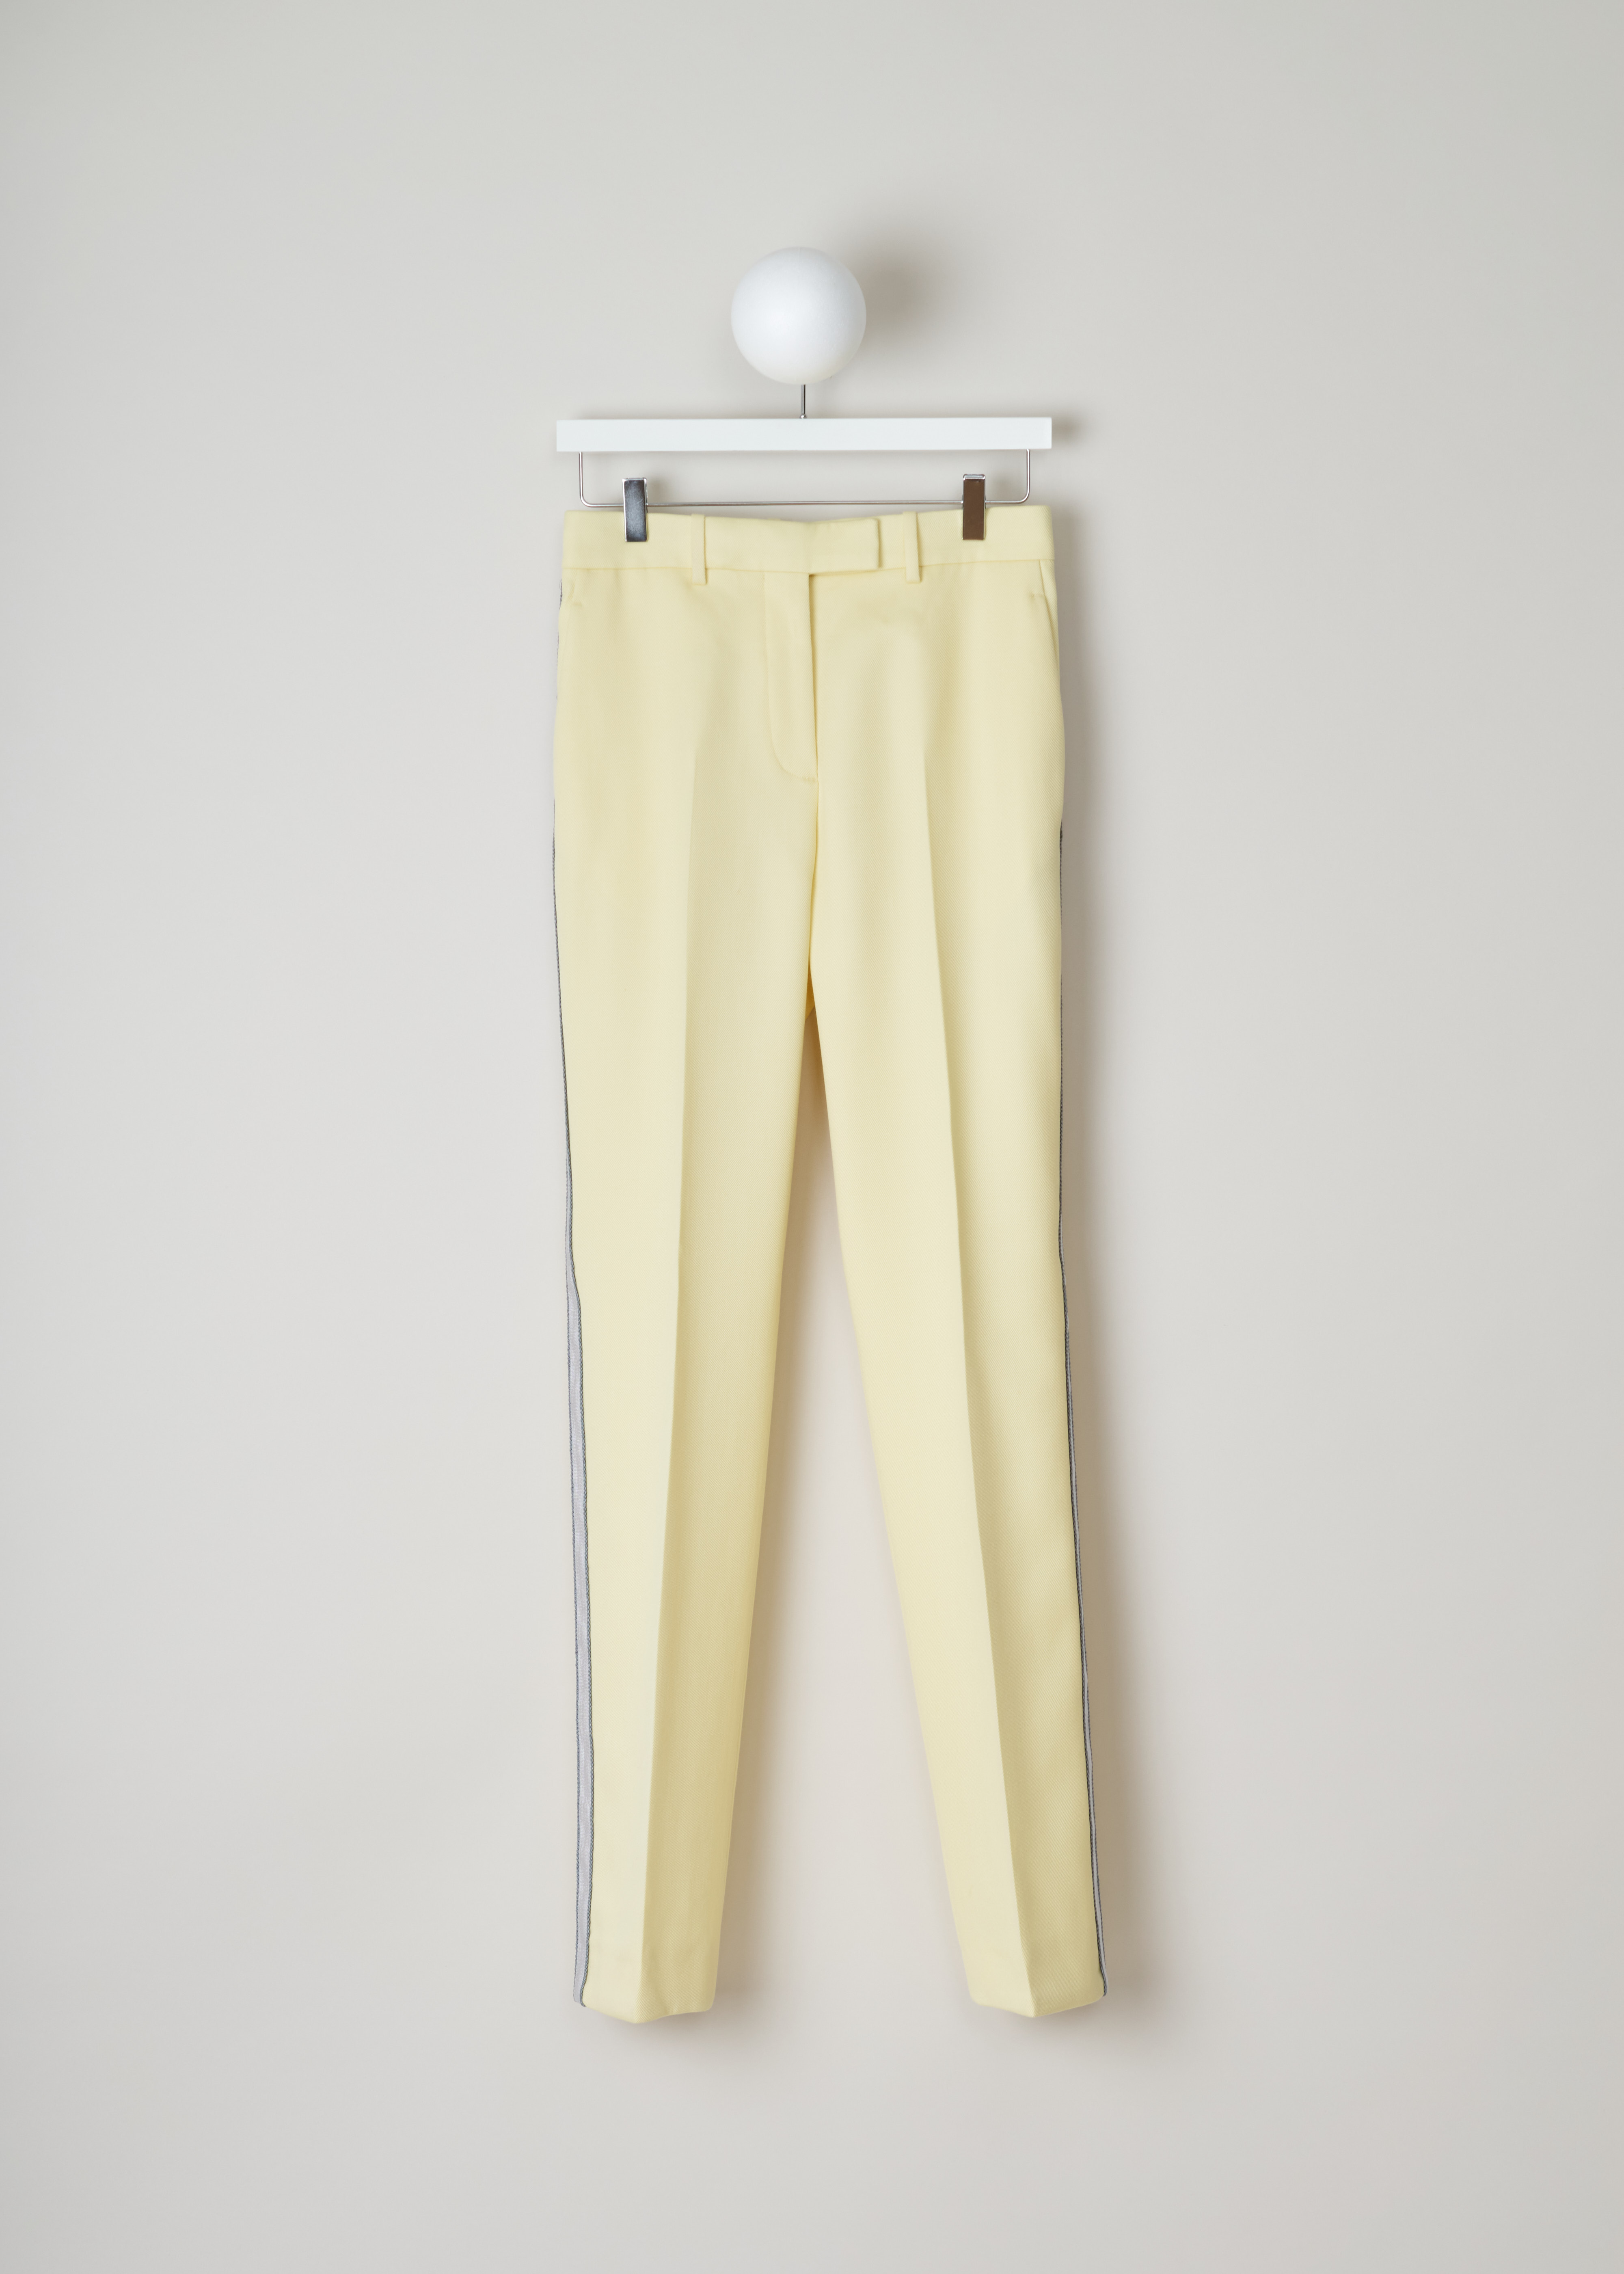 Cato Fashions | Cato Girls Limelight Ponte Pants